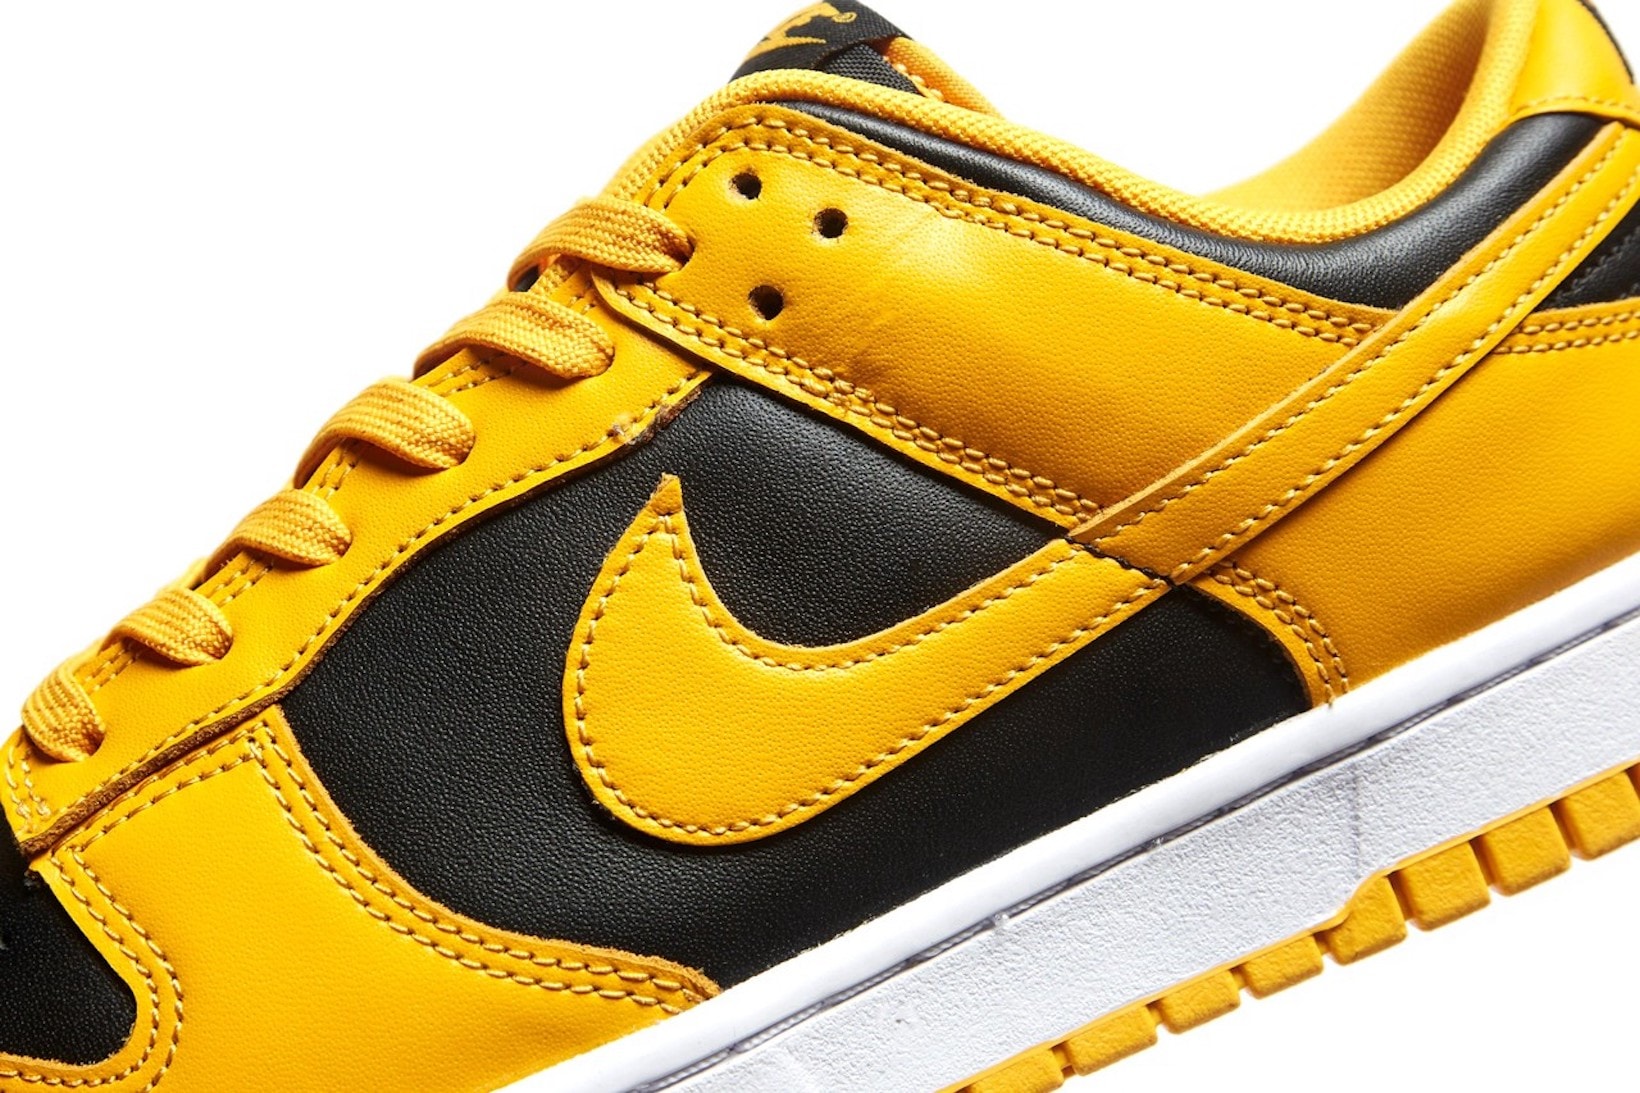 nike dunk low sneakers goldenrod yellow black white footwear shoes kicks lateral